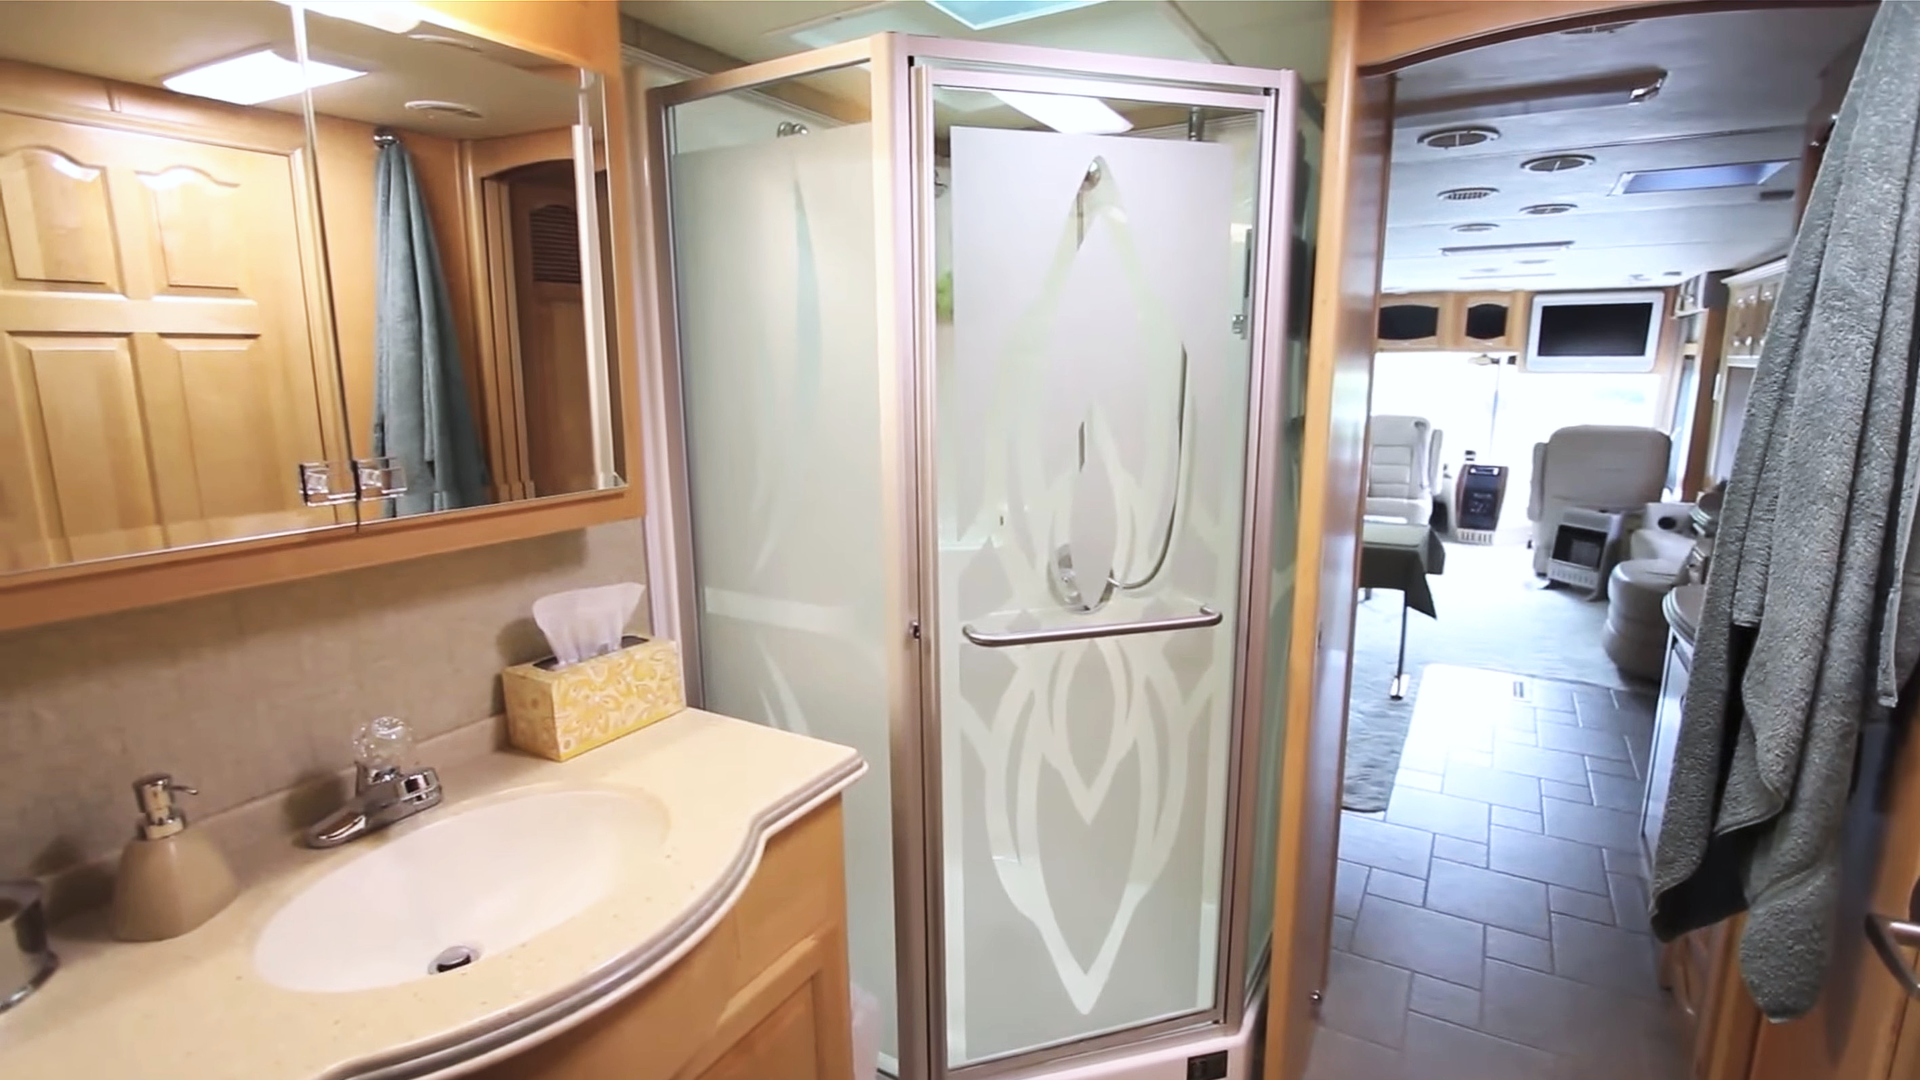 What is a dry bath in a camper?